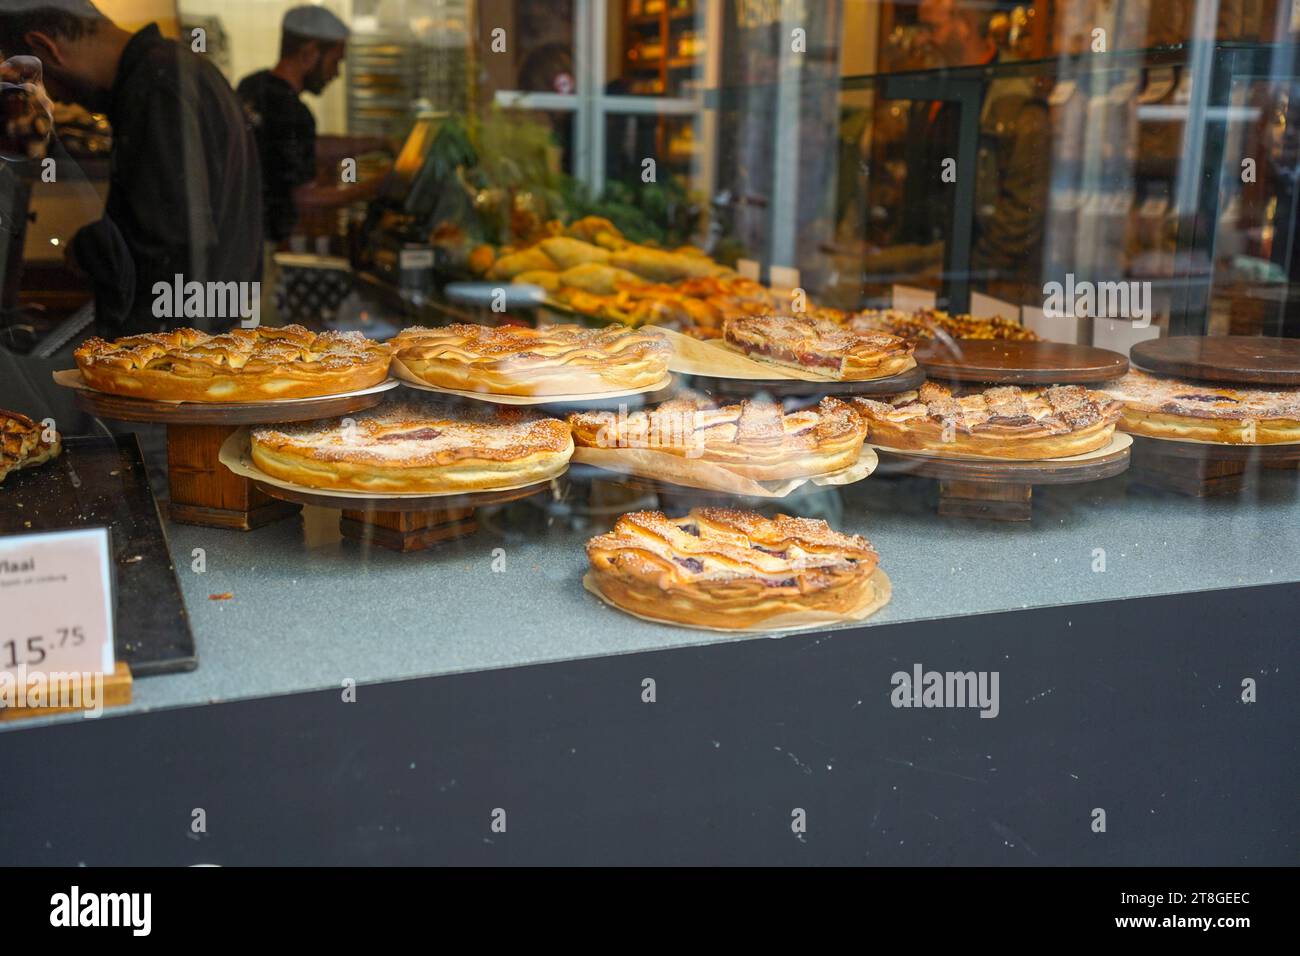 Limurgse vlaai, typical pie or dutch tart, on display in window pastry shop, Limburg, Maastricht, Southern Netherlands. Stock Photo